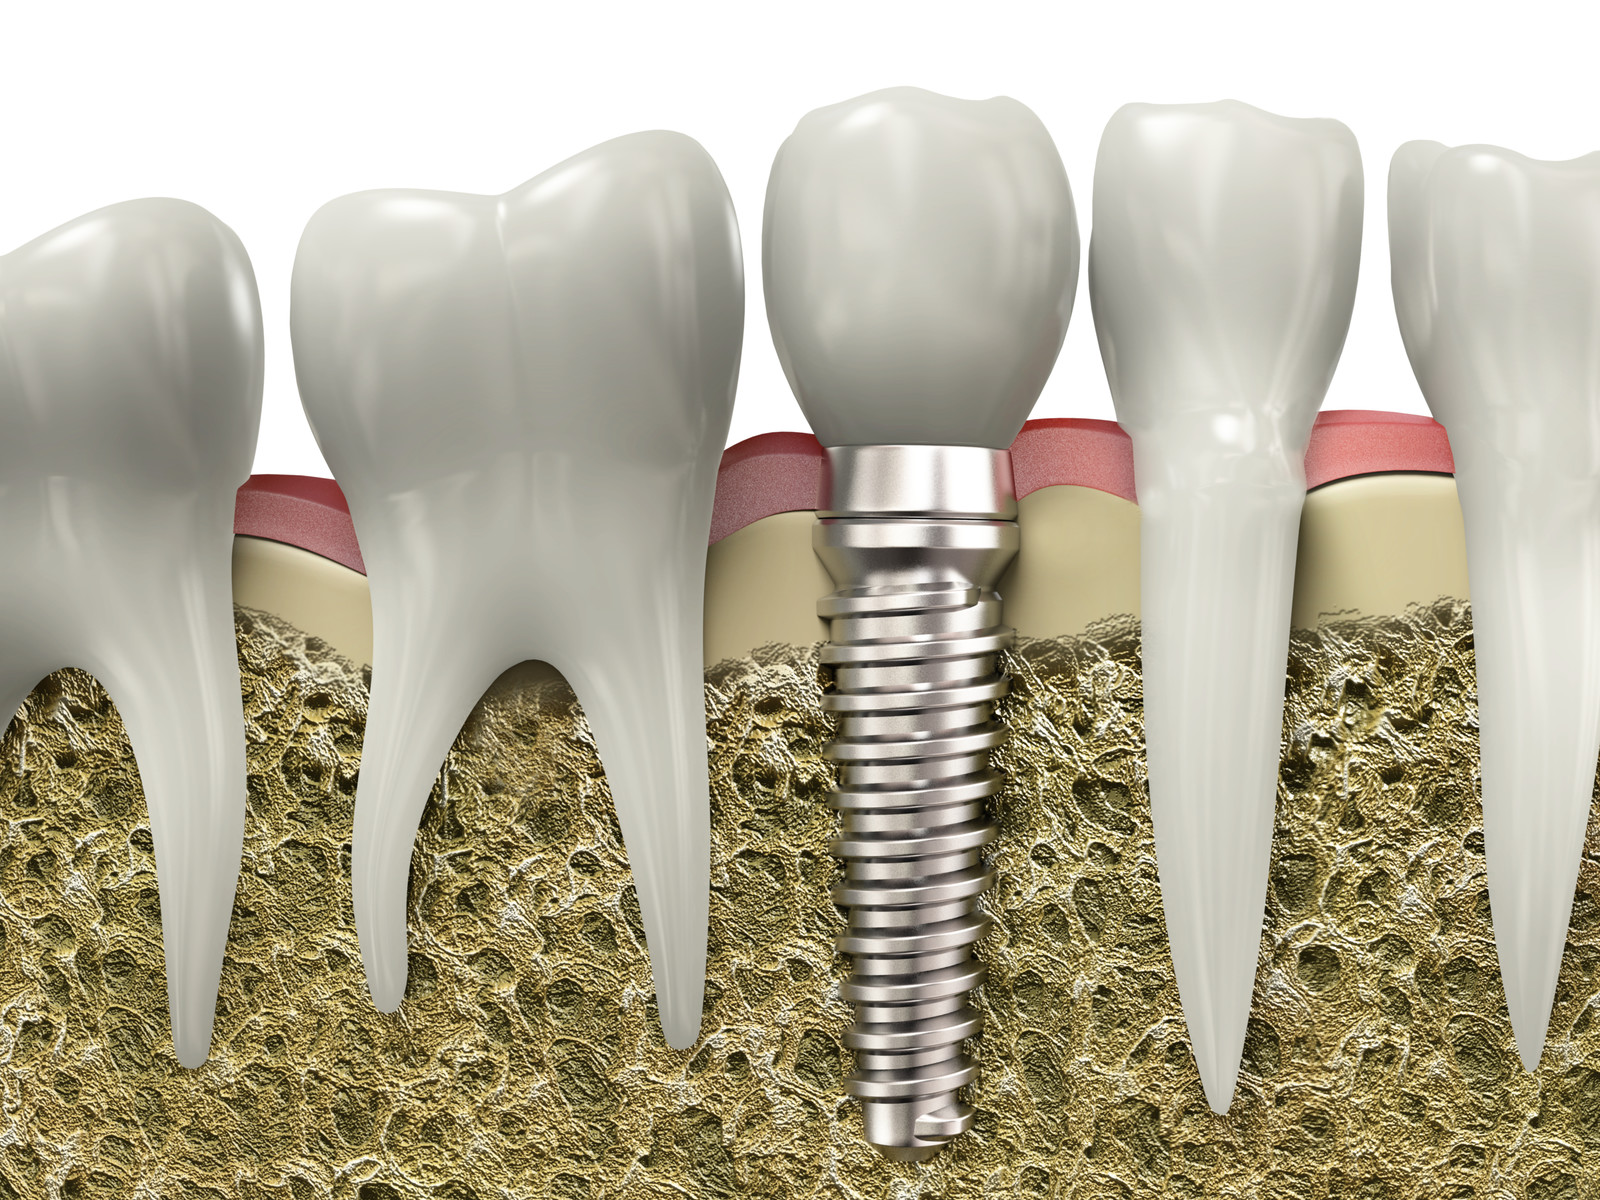 What do i do if my dental implant is loose?